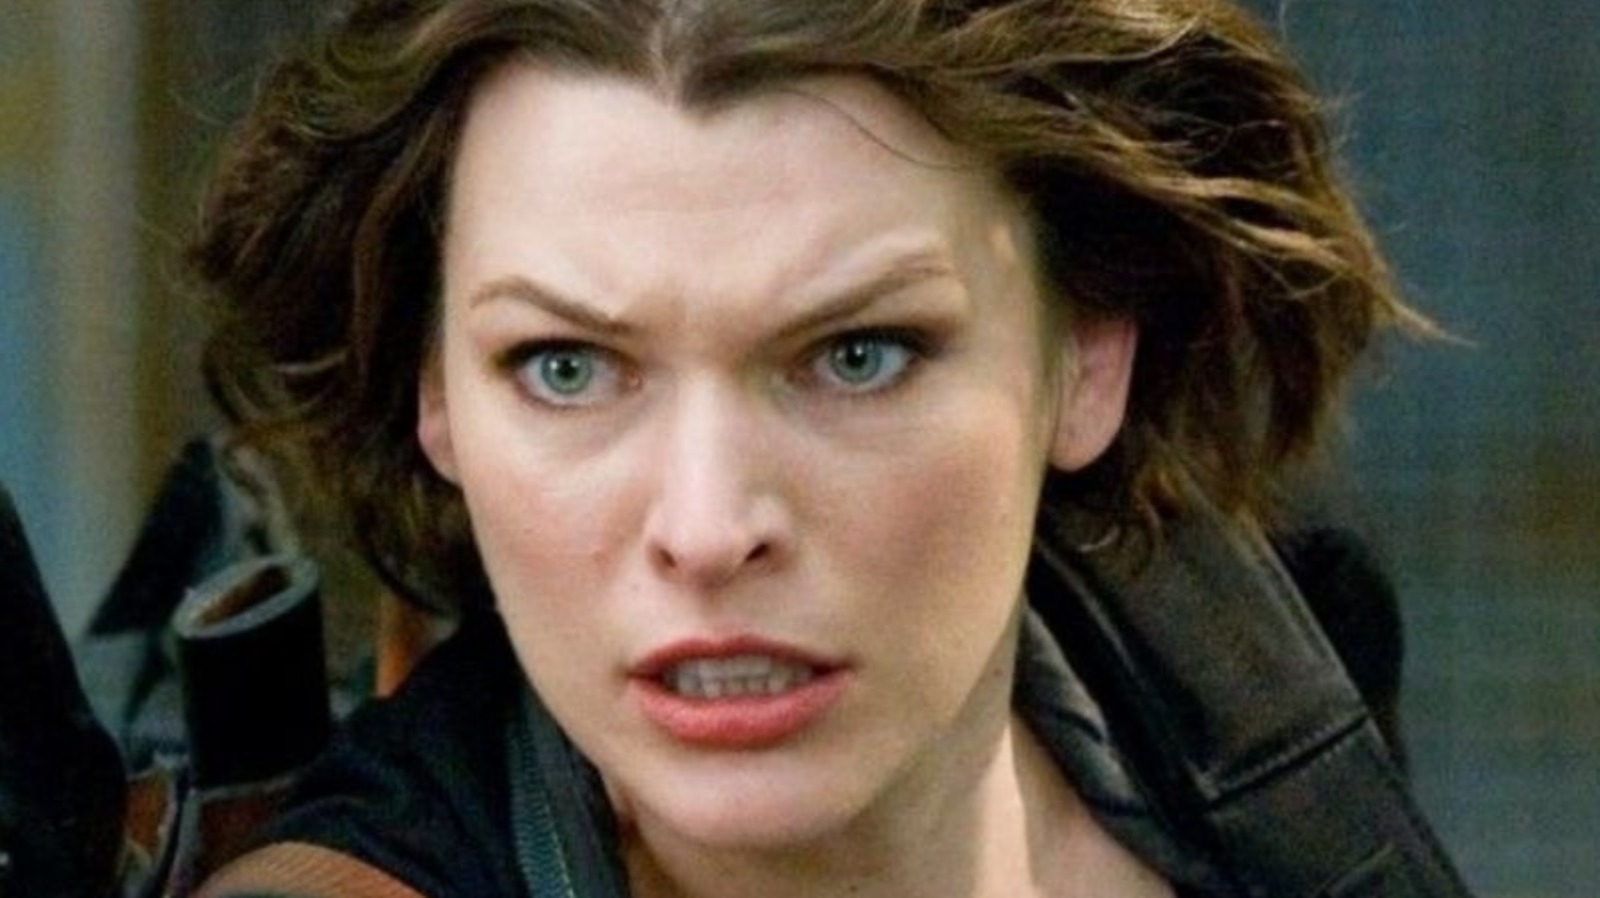 What Is the Best Resident Evil Movie? - HubPages